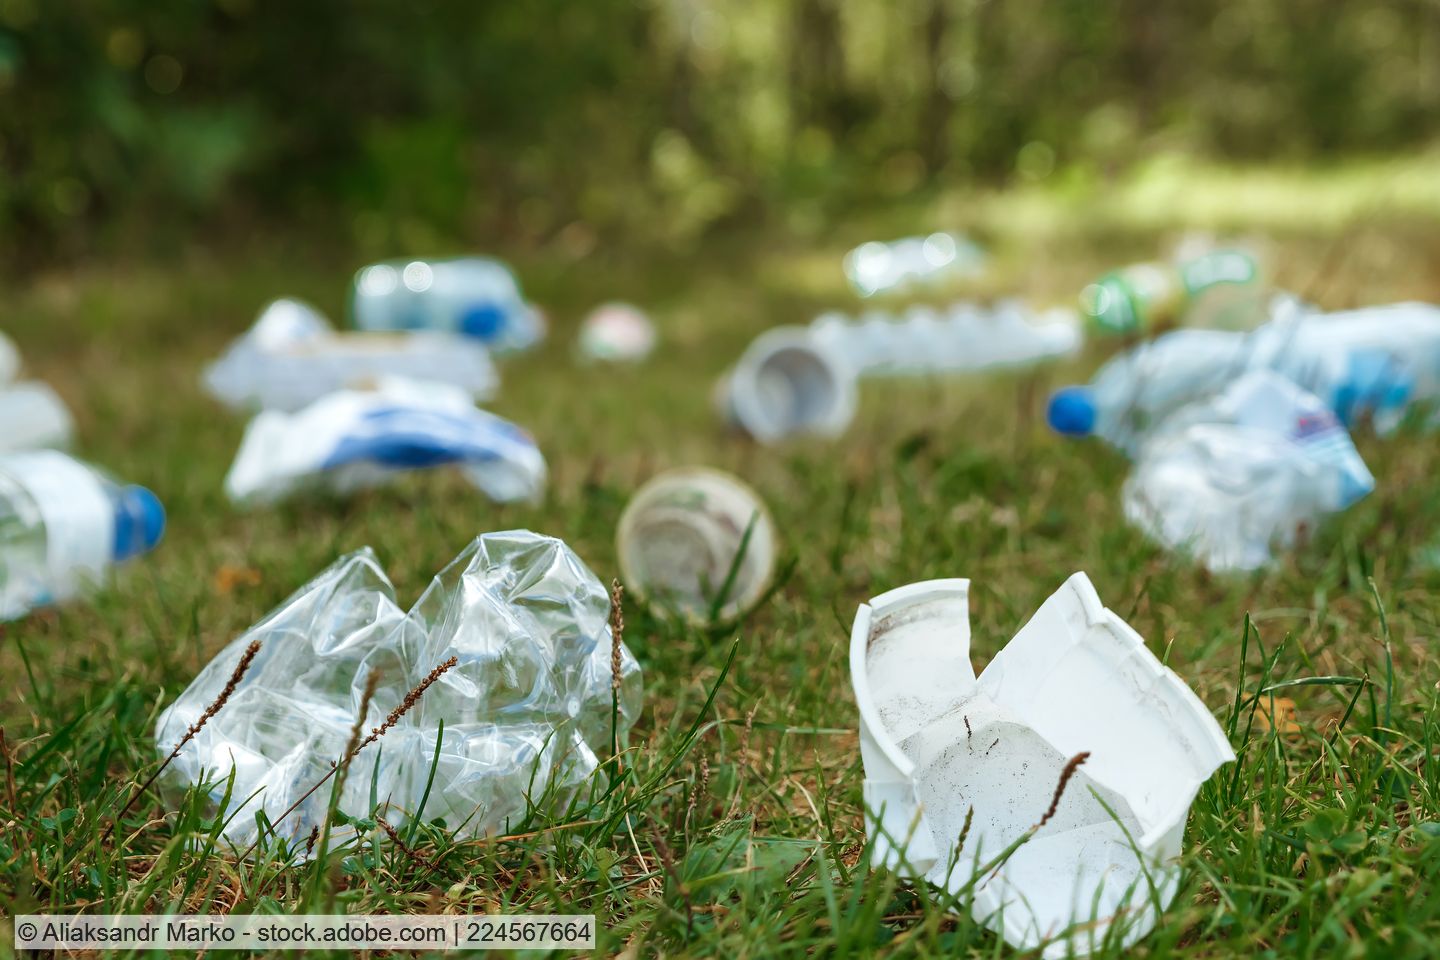 Crushed single-use plastic cups and bottles littered in a park.